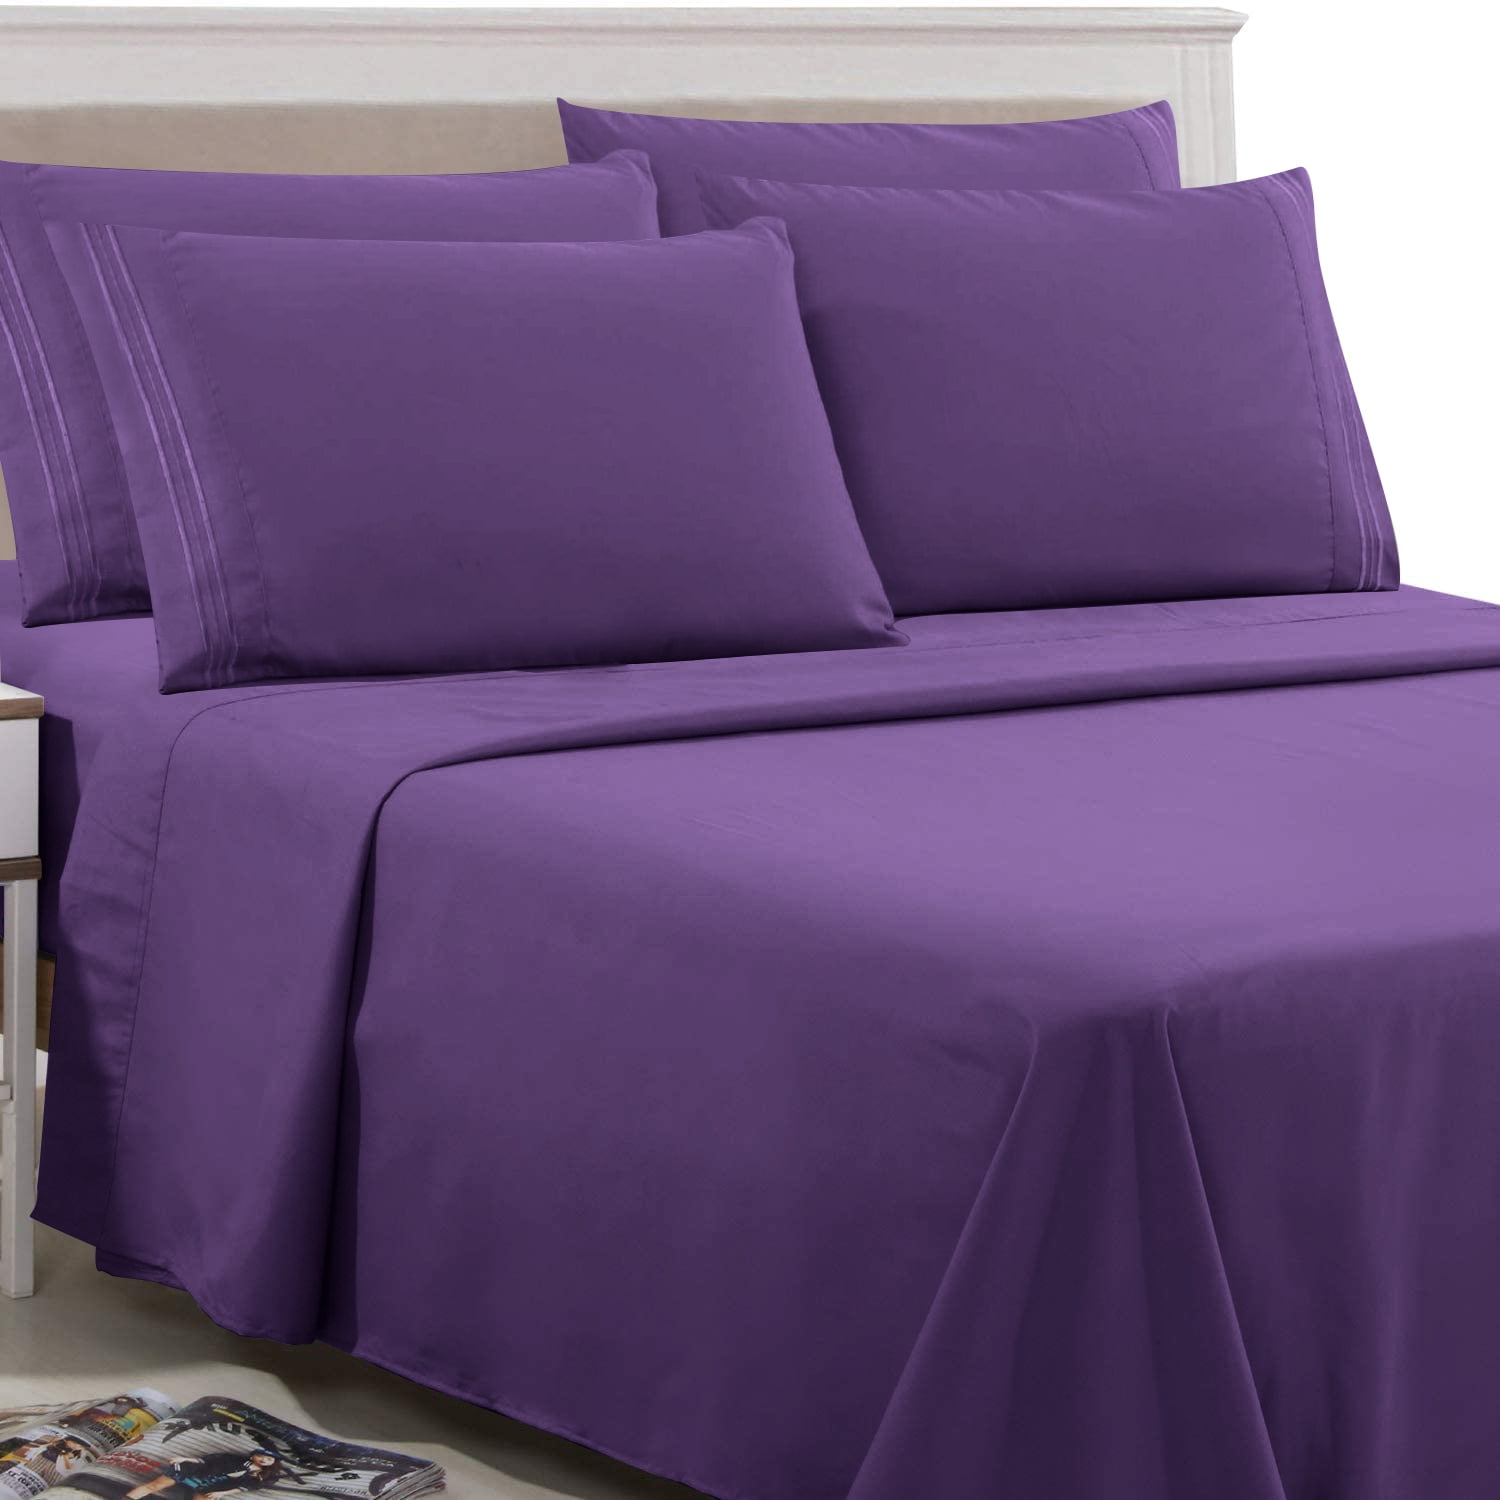 Details about   Tremendous Bedding Collection Deep Pocket Egyptian Cotton Queen Size All Color 